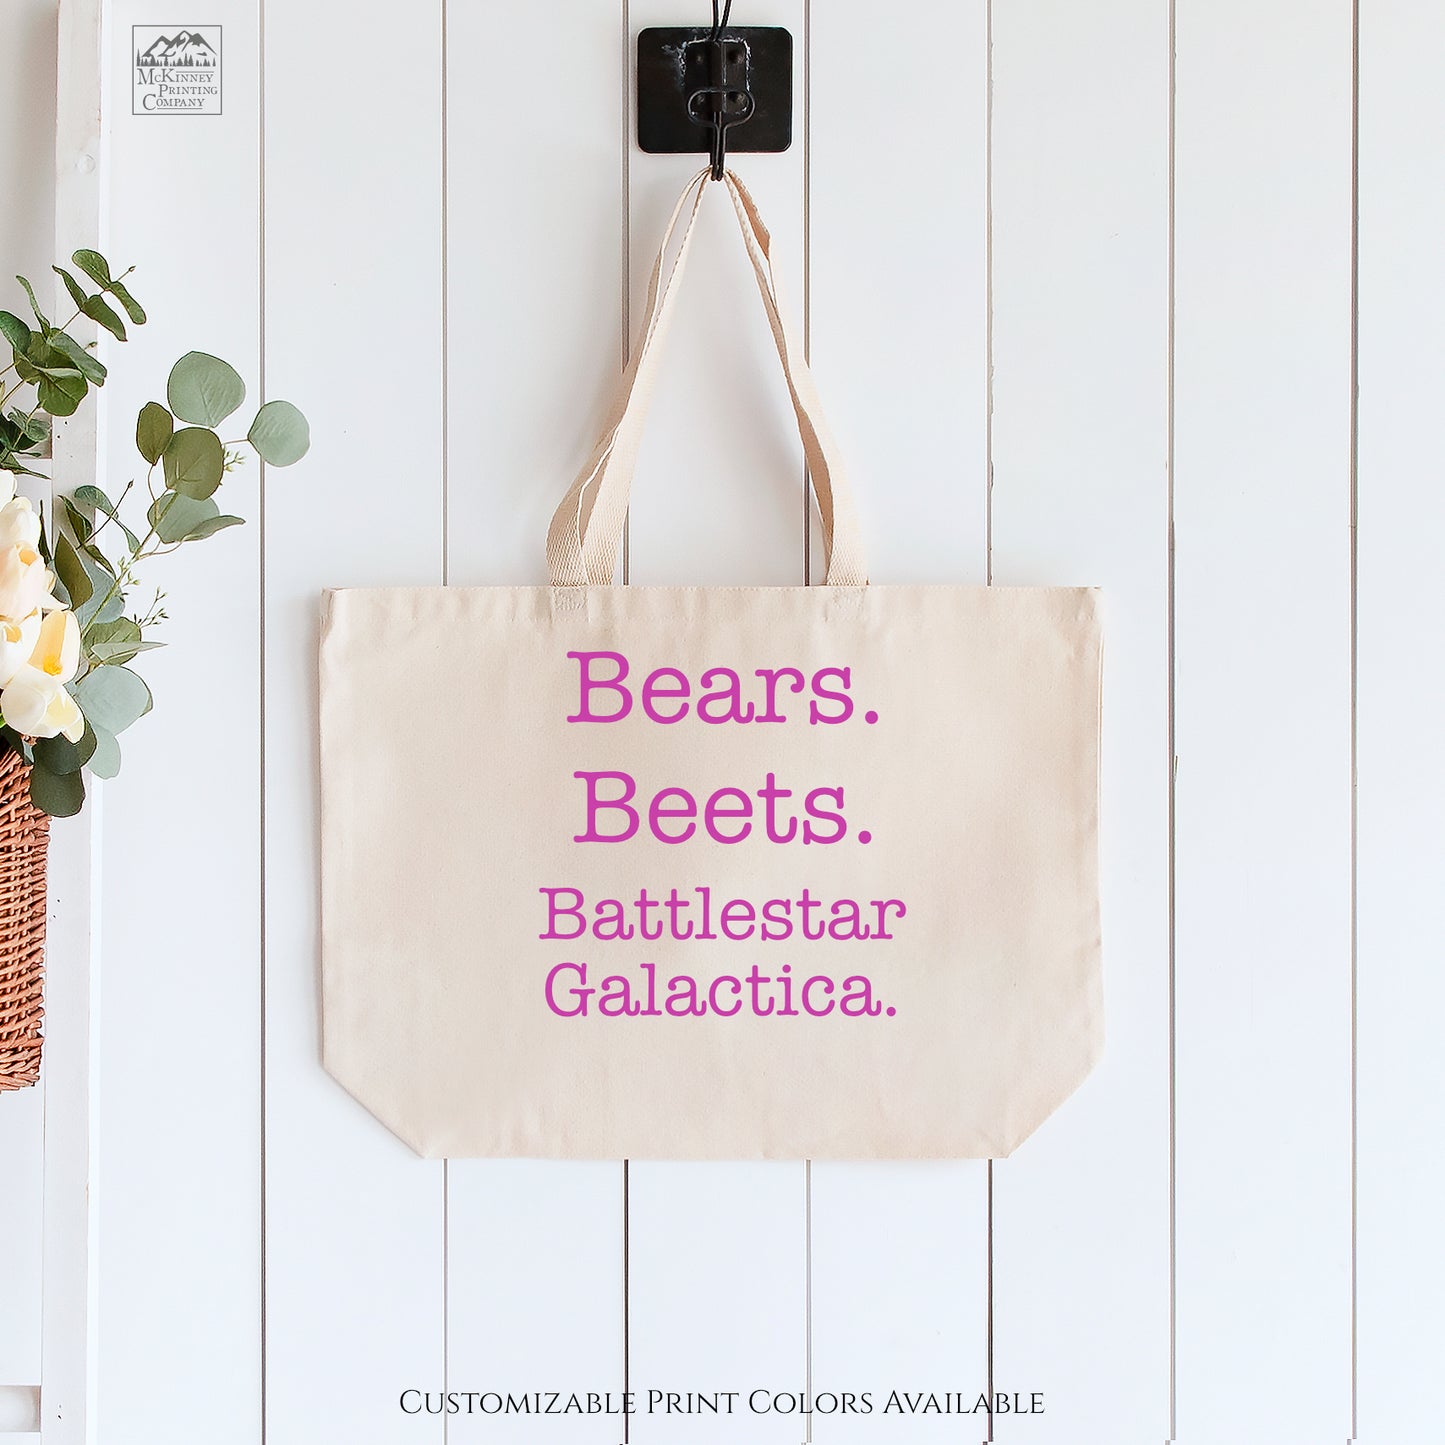 Bears Beets Battlestar Galactica - Canvas Tote Bag with Zipper, The Office, Fabric Shoulder Bag